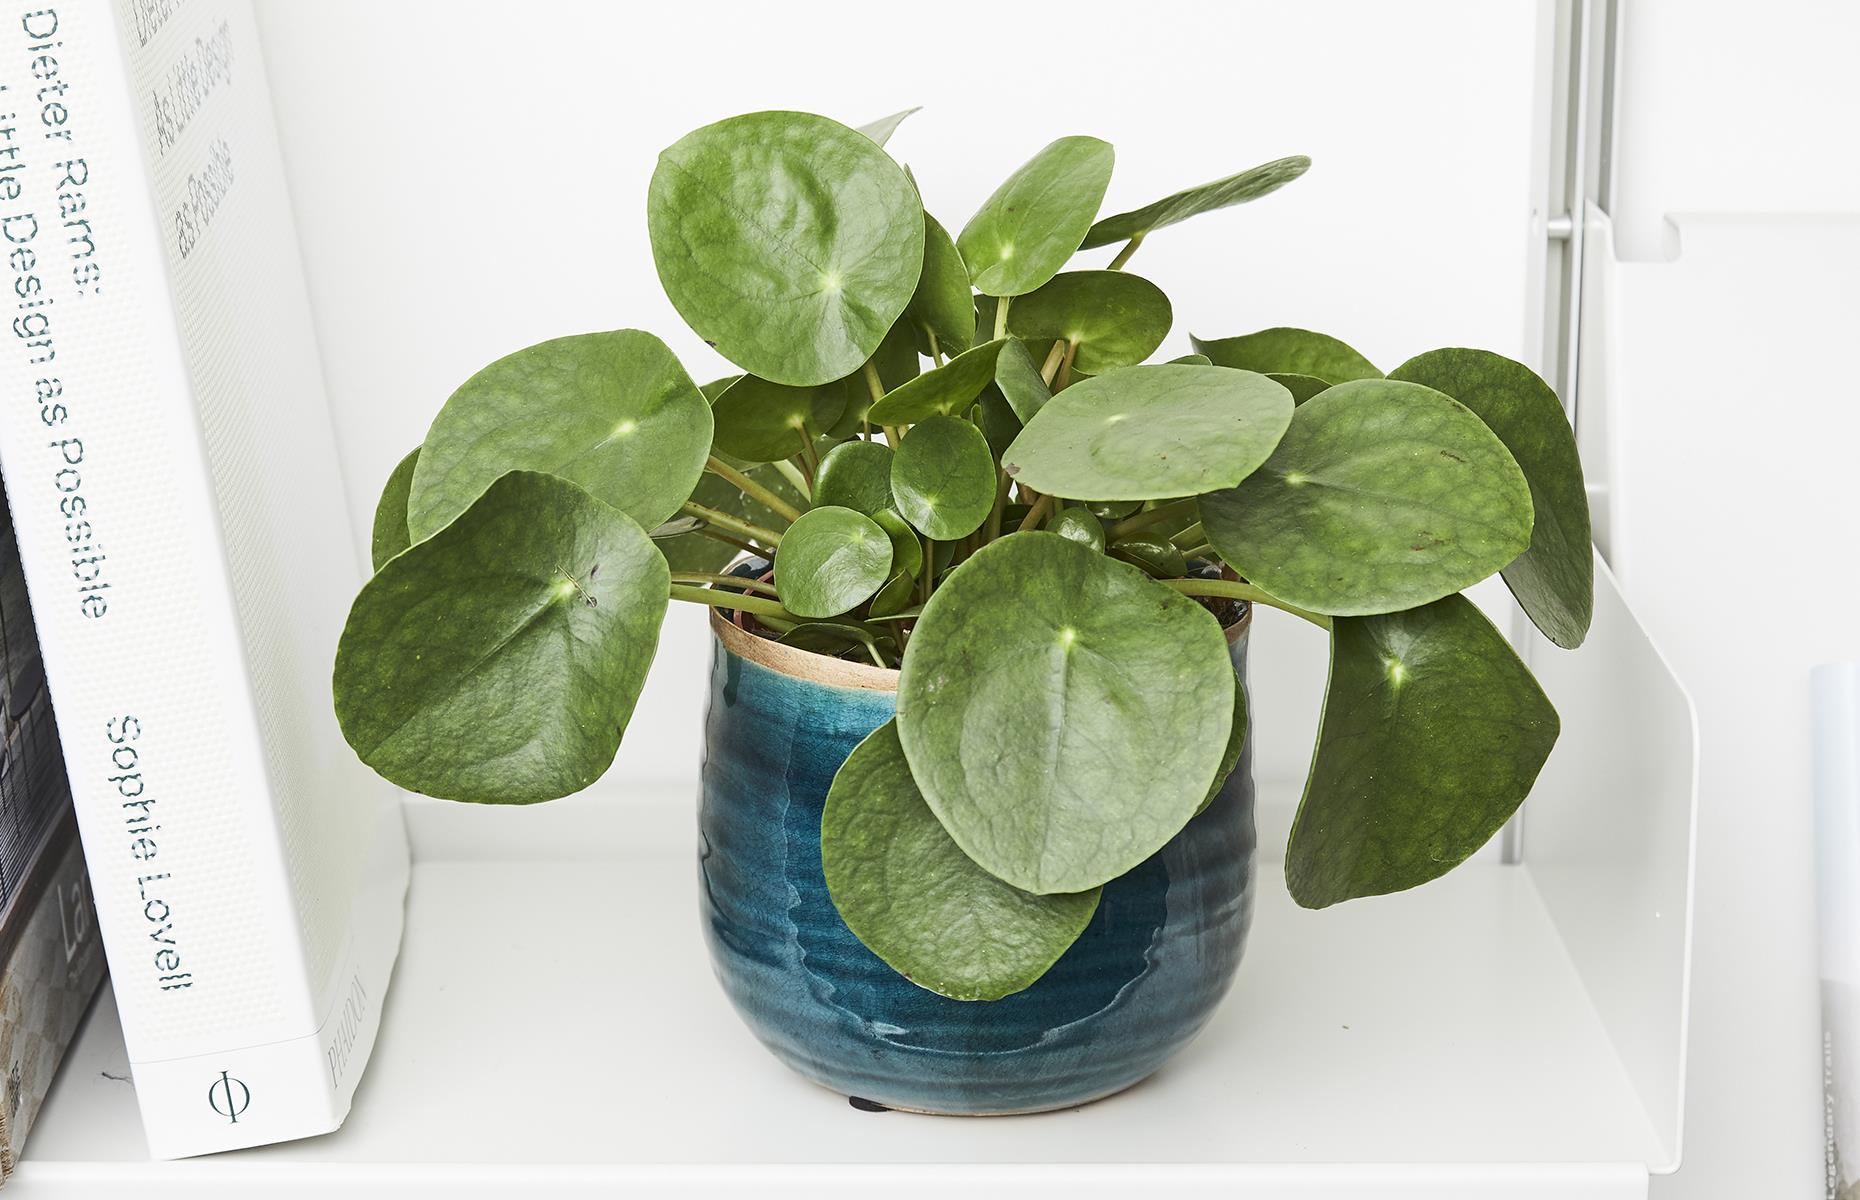 Chinese money Plant (Pilea peperomioides)